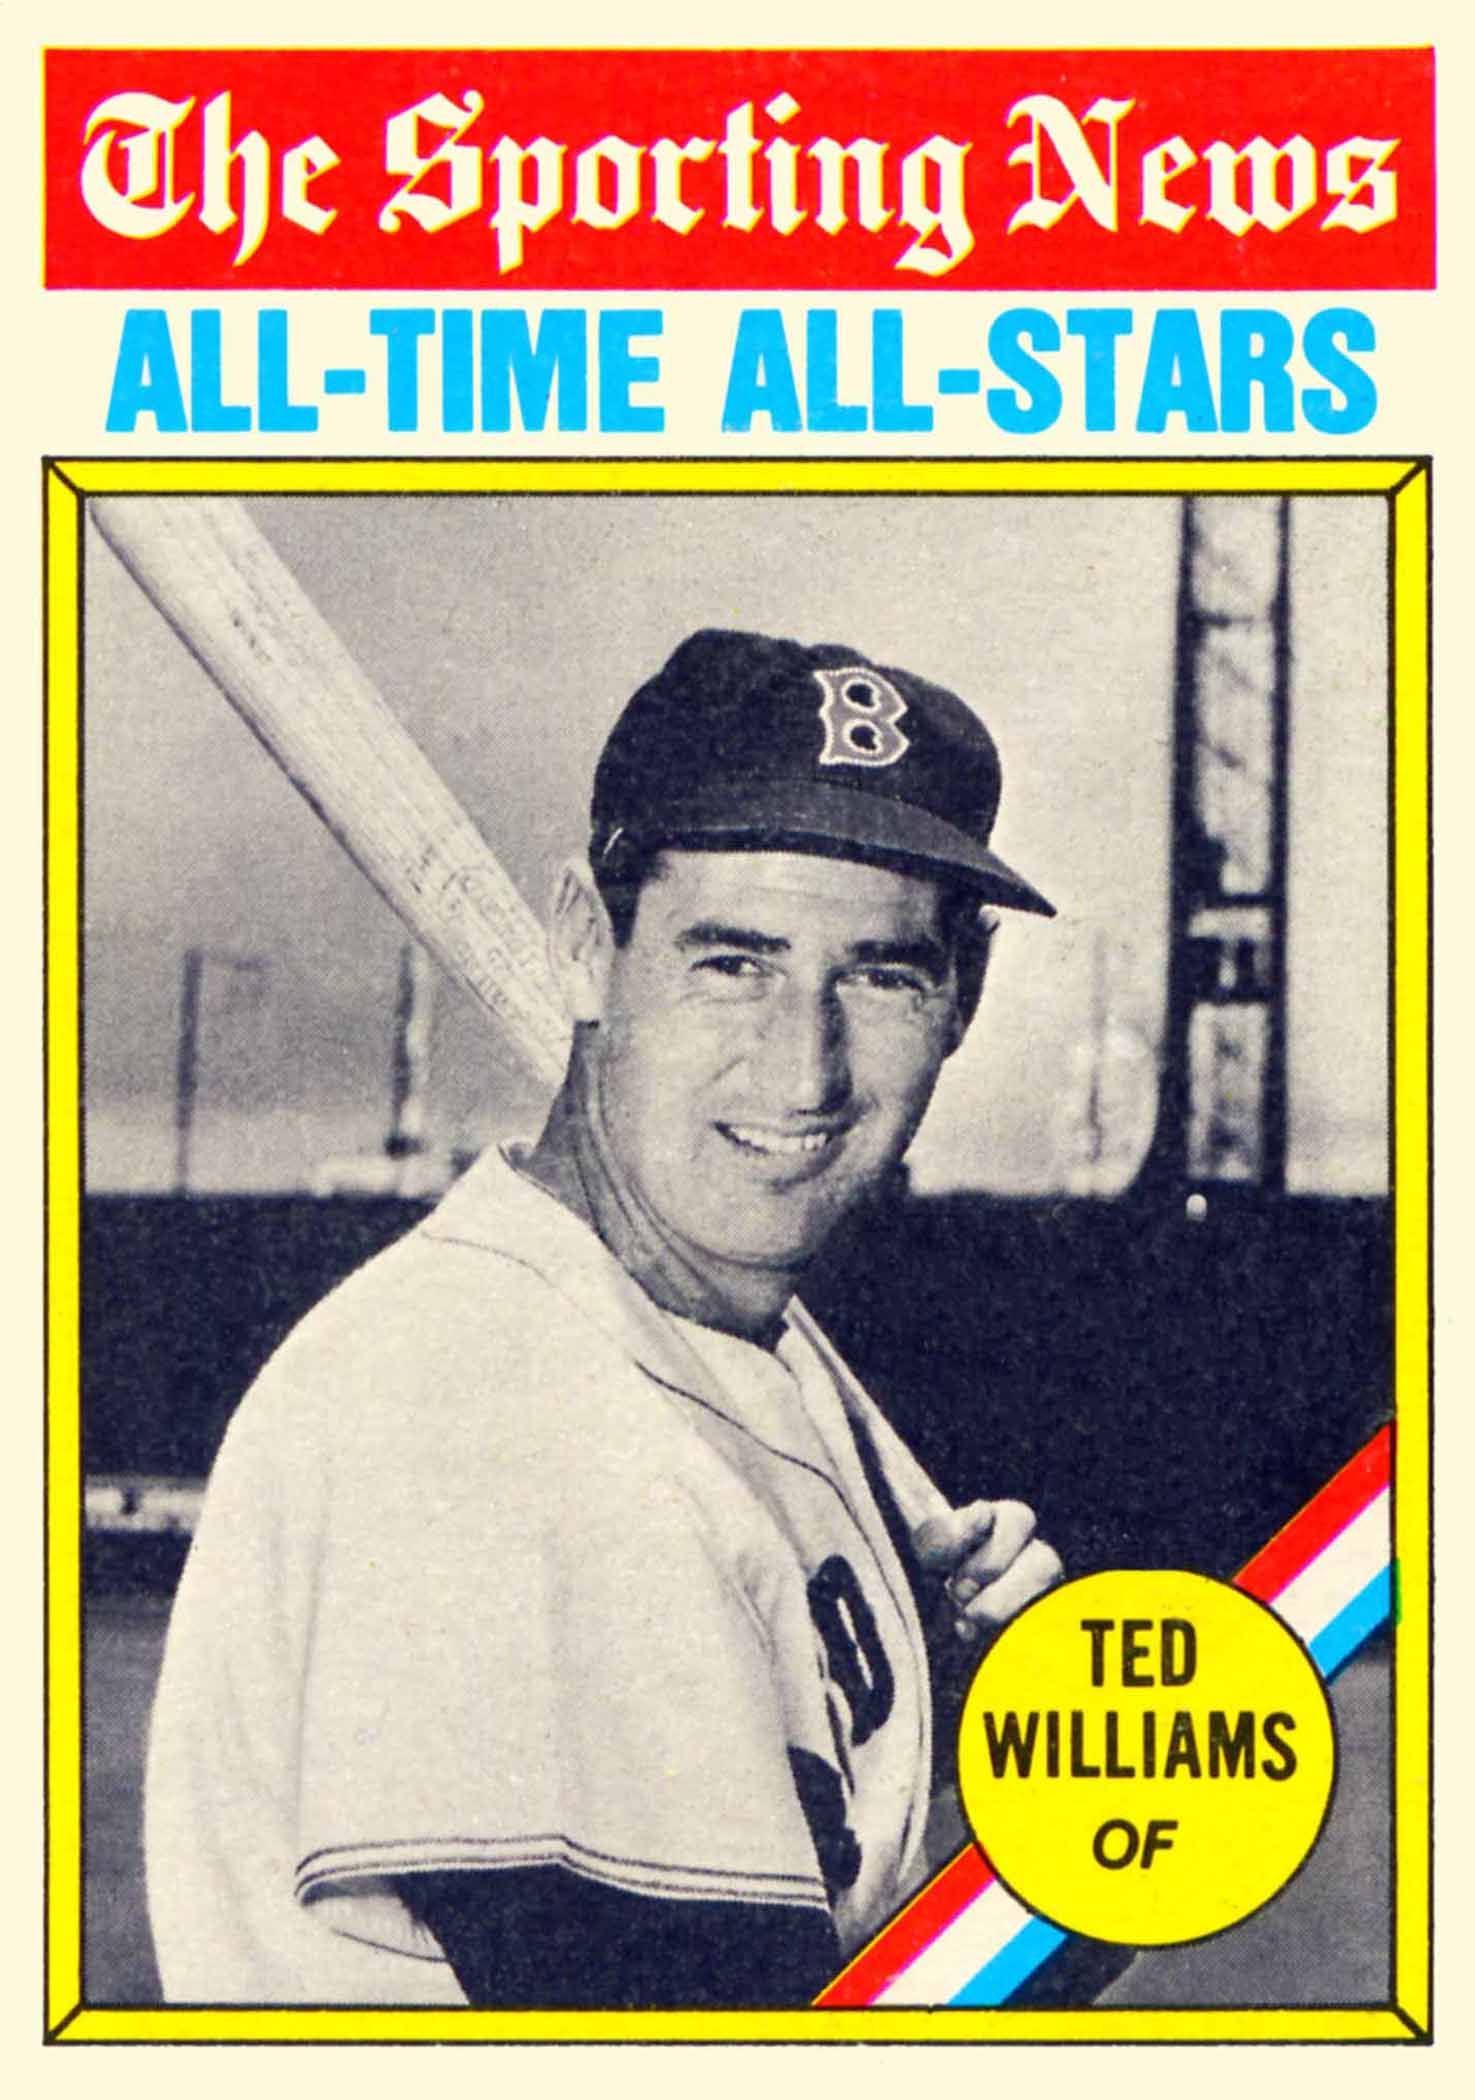 1976 Topps All-Time All-Stars